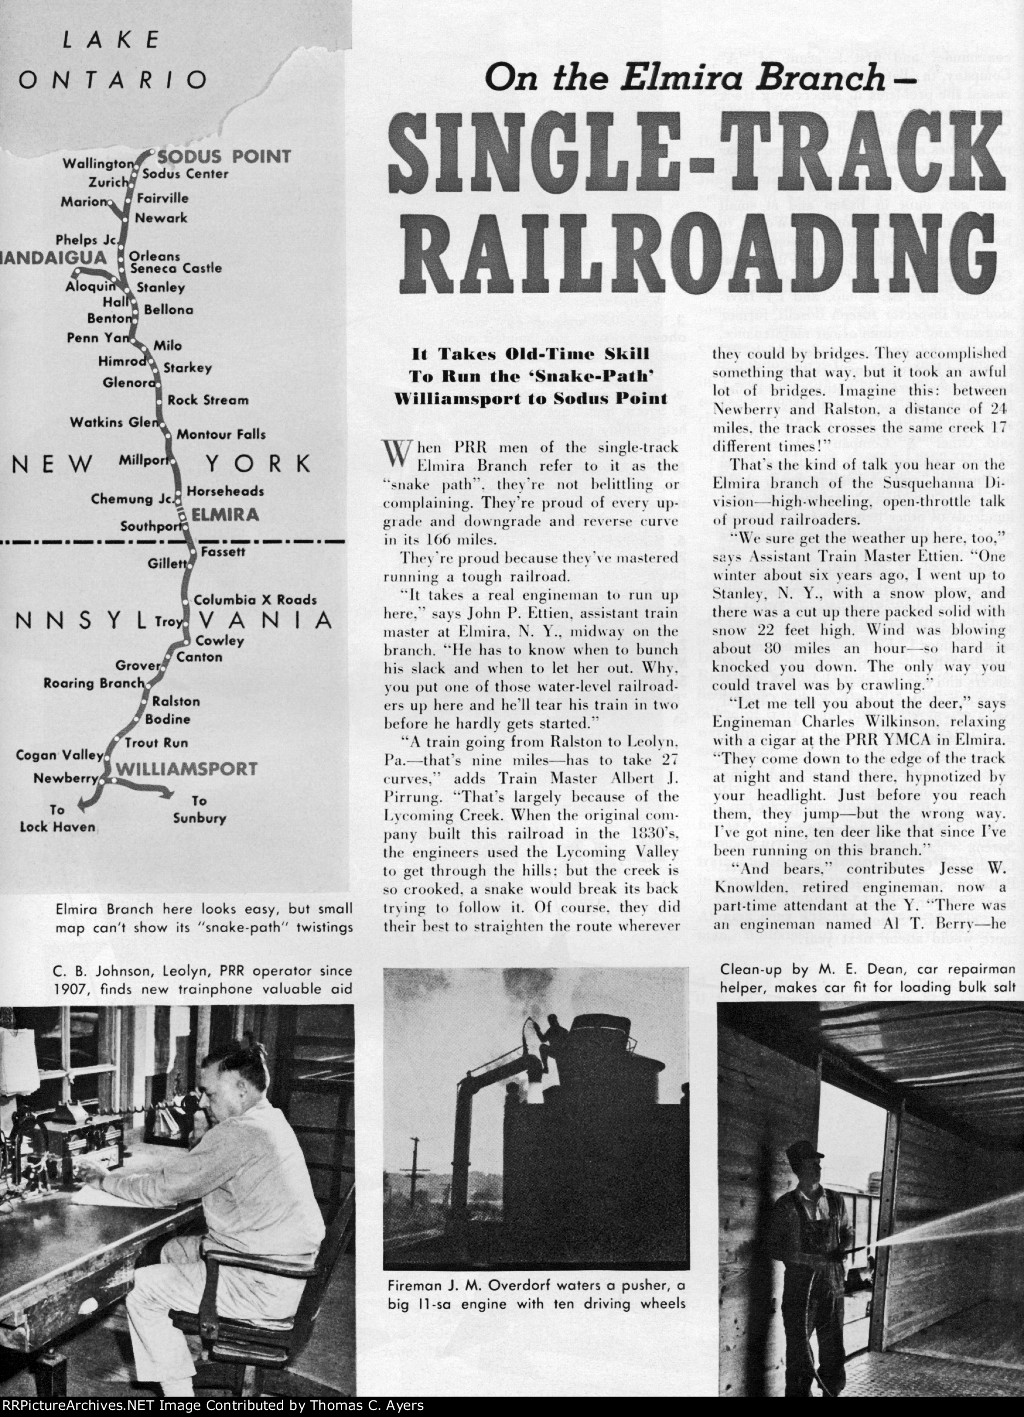 "On The Elmira Branch," Page 14, 1953